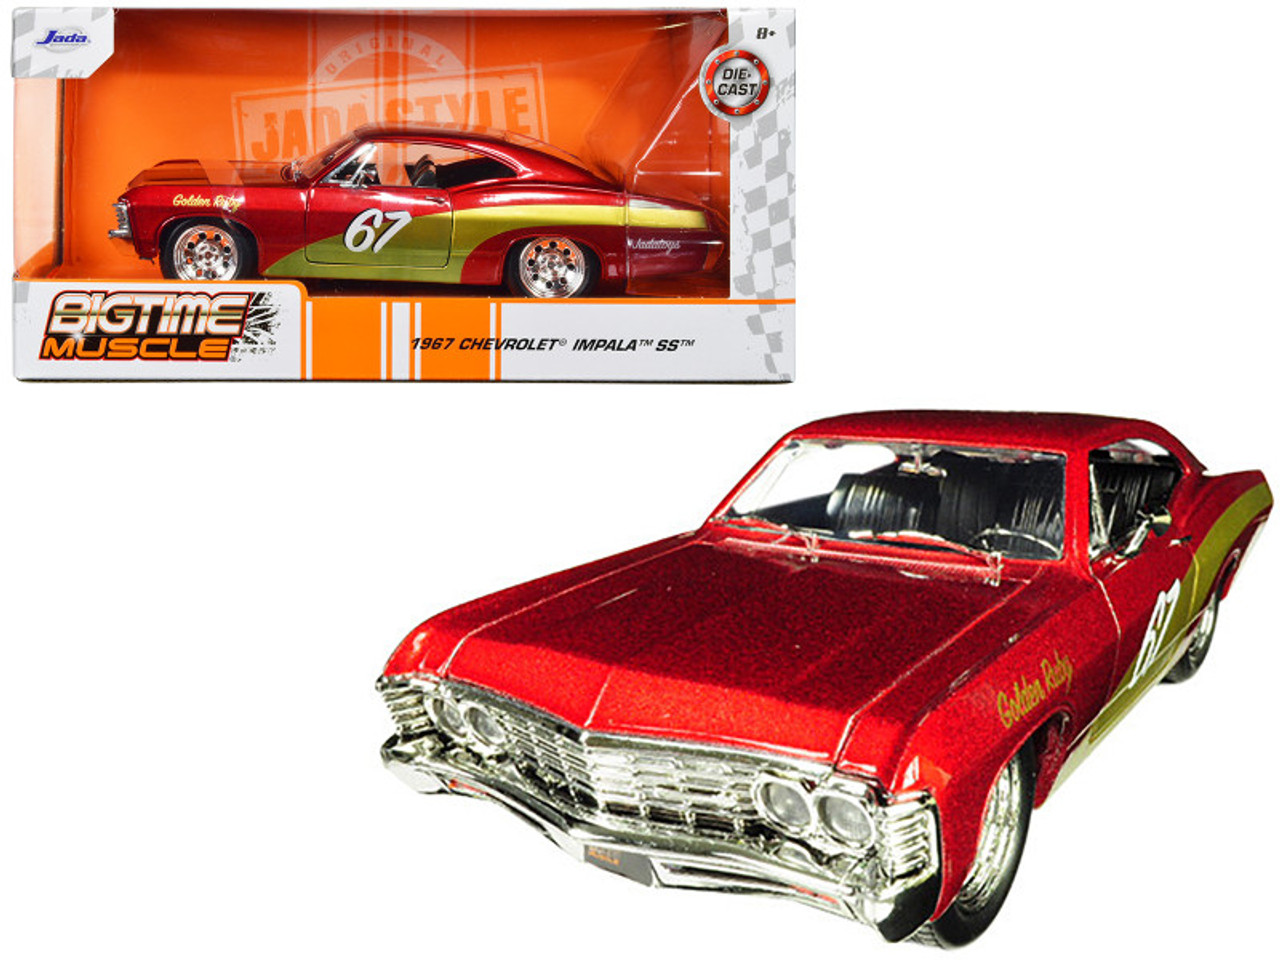 1967 Chevrolet Impala SS #67 "Golden Ruby" Red with Gold Stripes "Bigtime Muscle" 1/24 Diecast Model Car by Jada